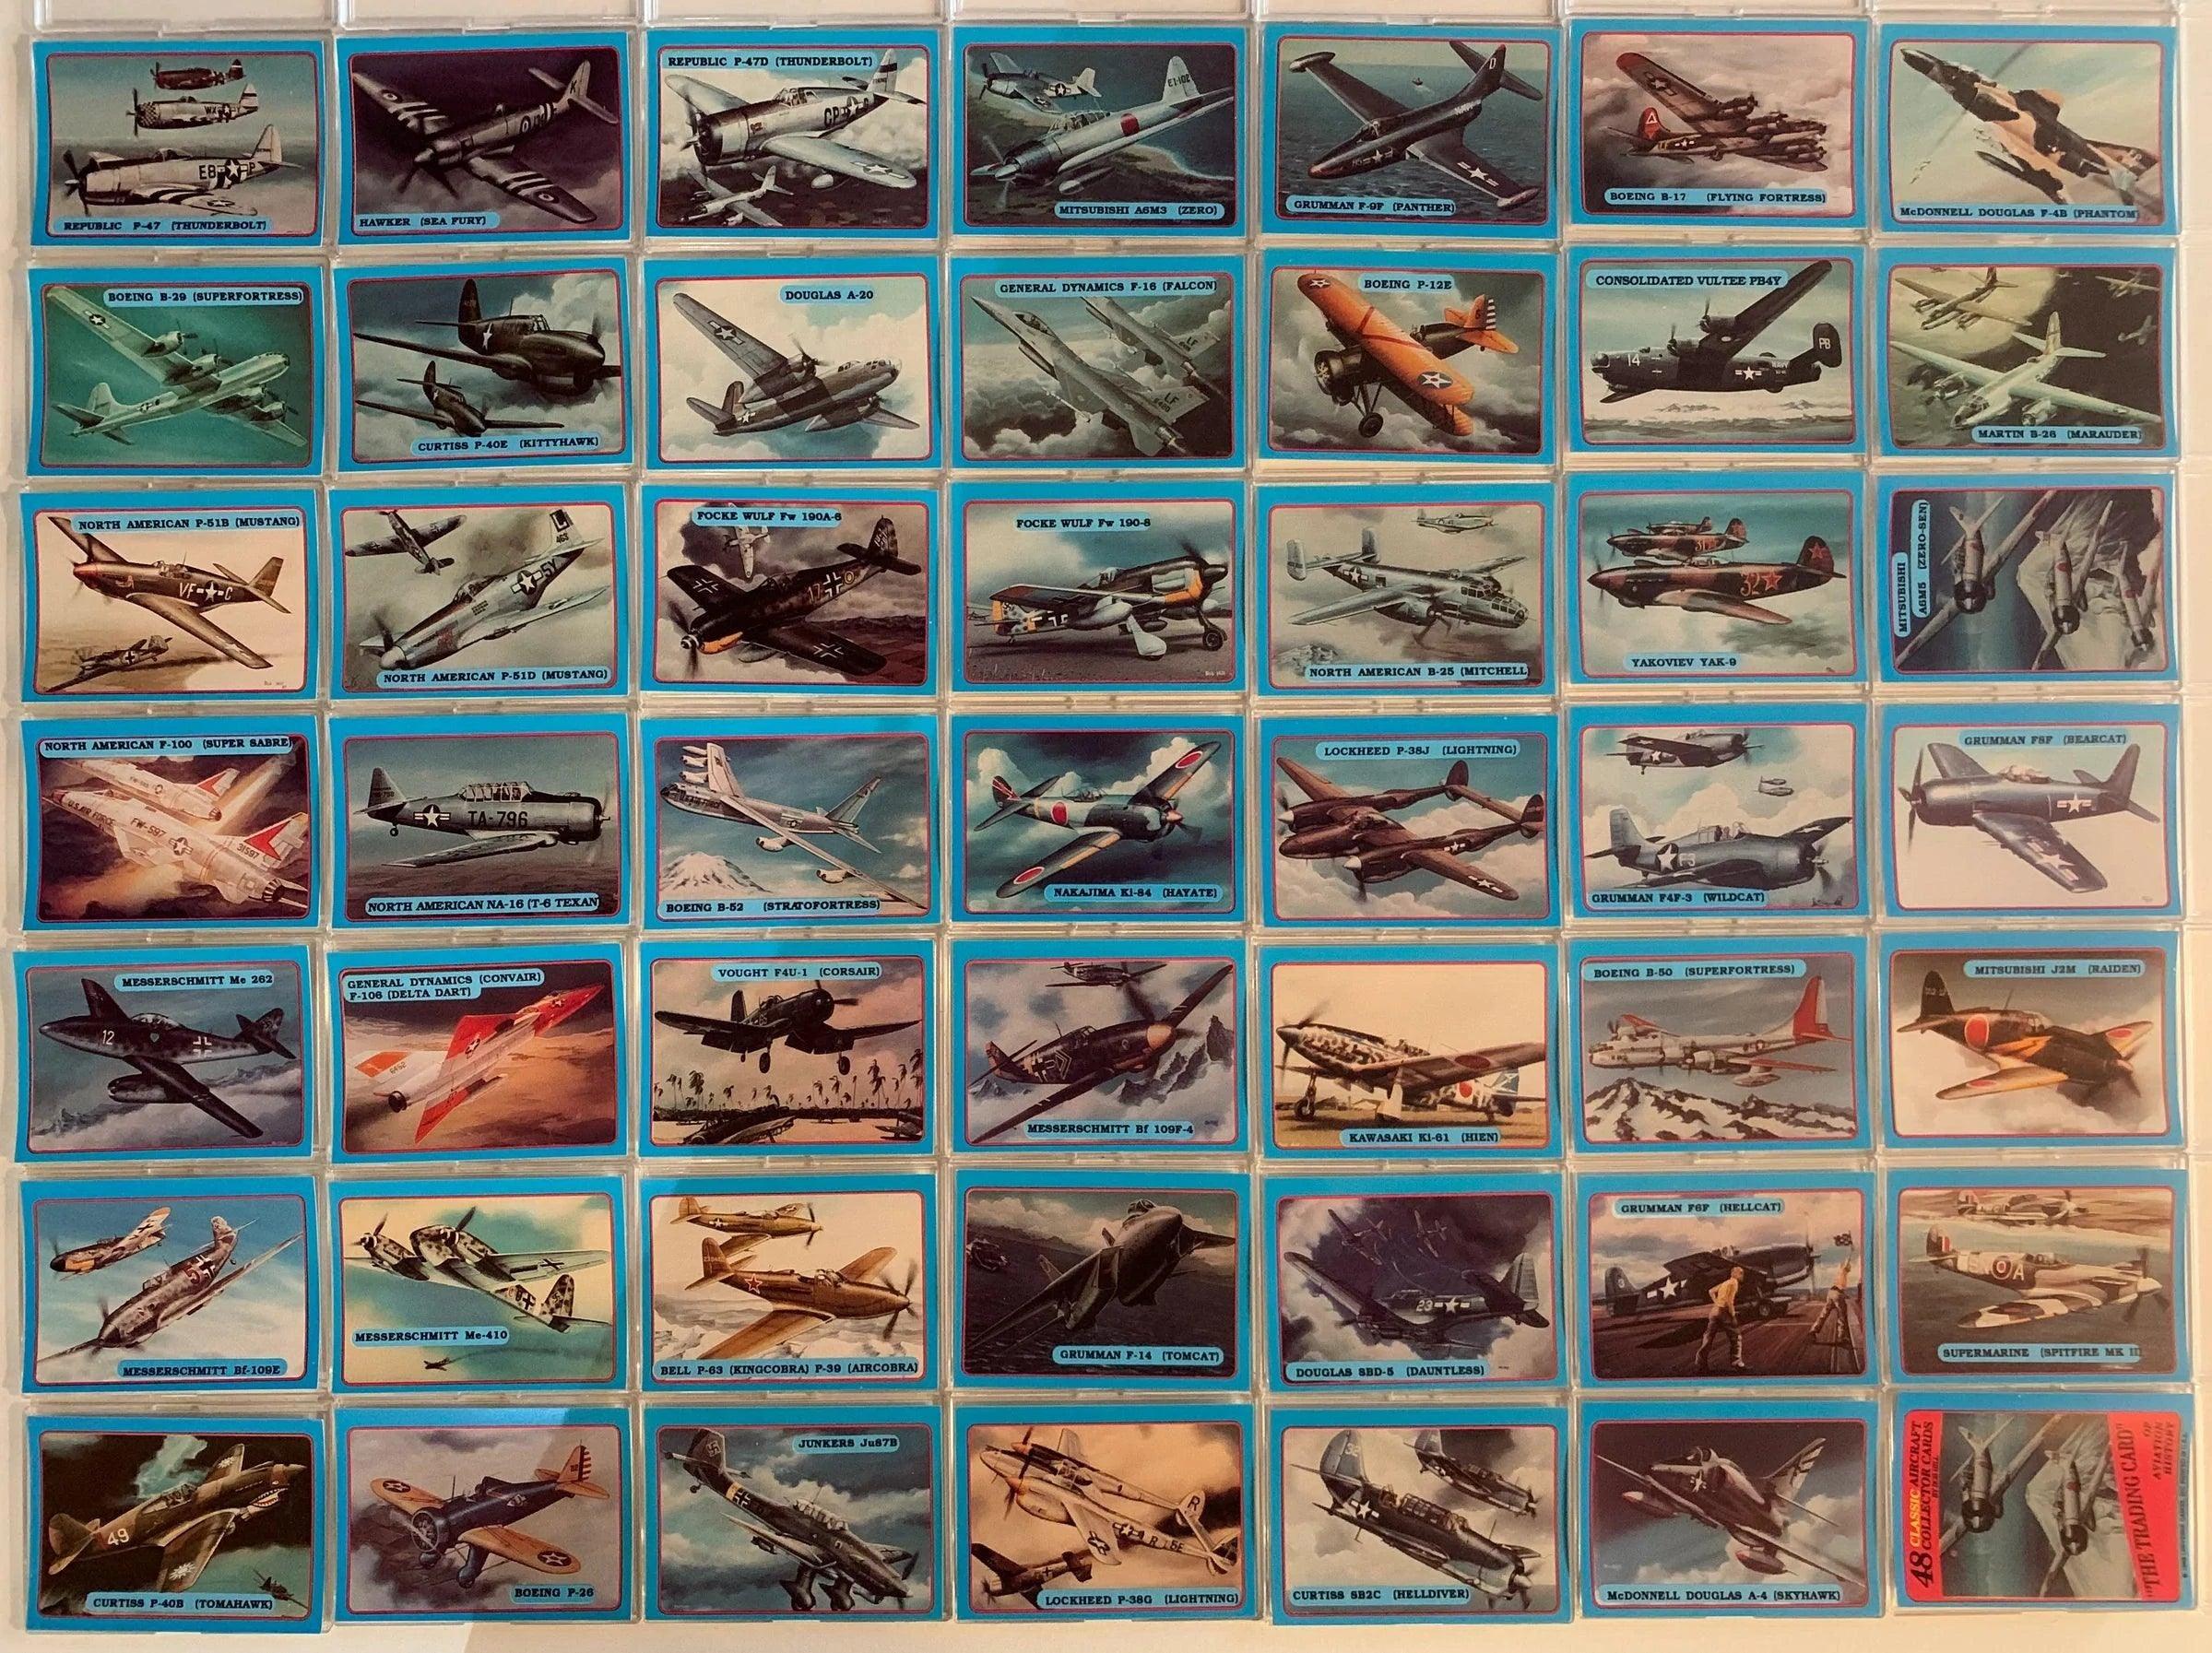 1988 CLASSIC AIRCRAFT WARBIRDS BASE CARD SET AND BINDER BY UNIVERSAL GAMES - Kings Comics